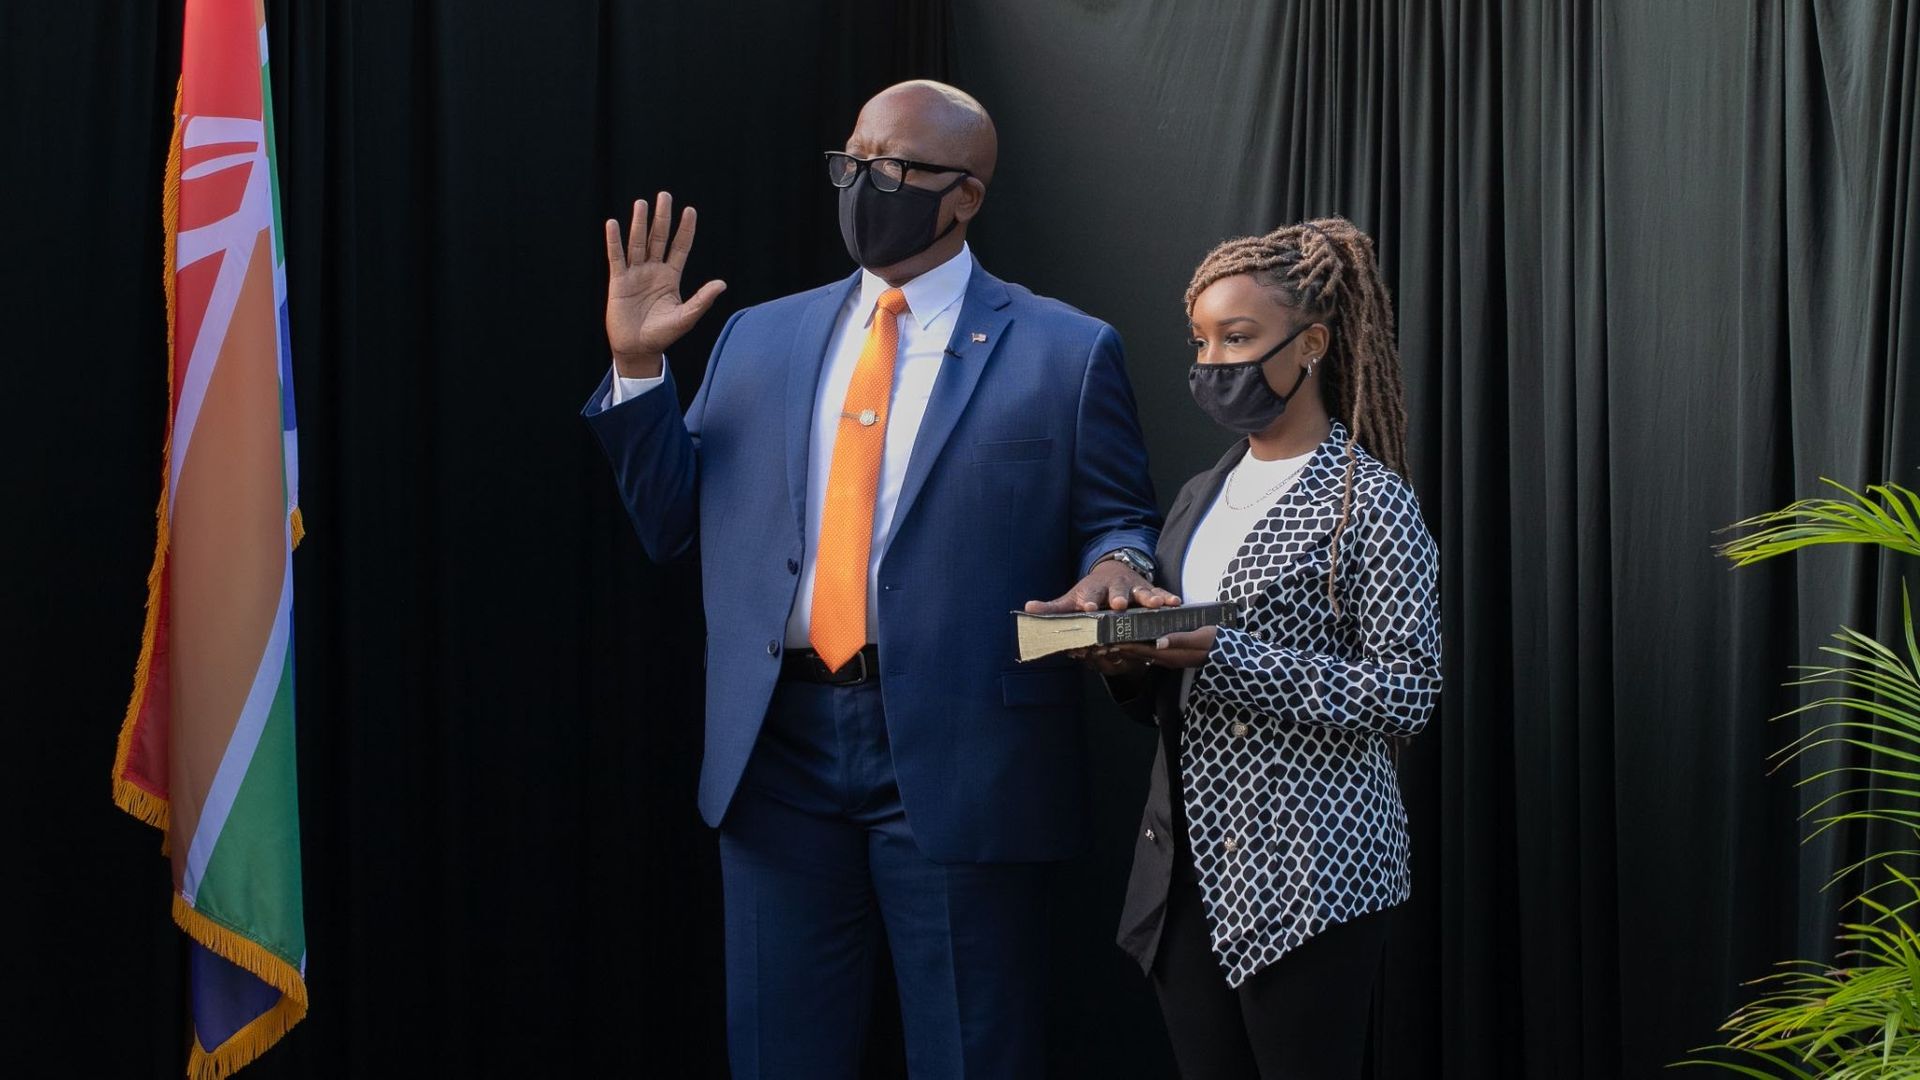 Ken Welch holds his right hand up as he is sworn in, with his daughter next to him holding the Bible. Both wear masks.